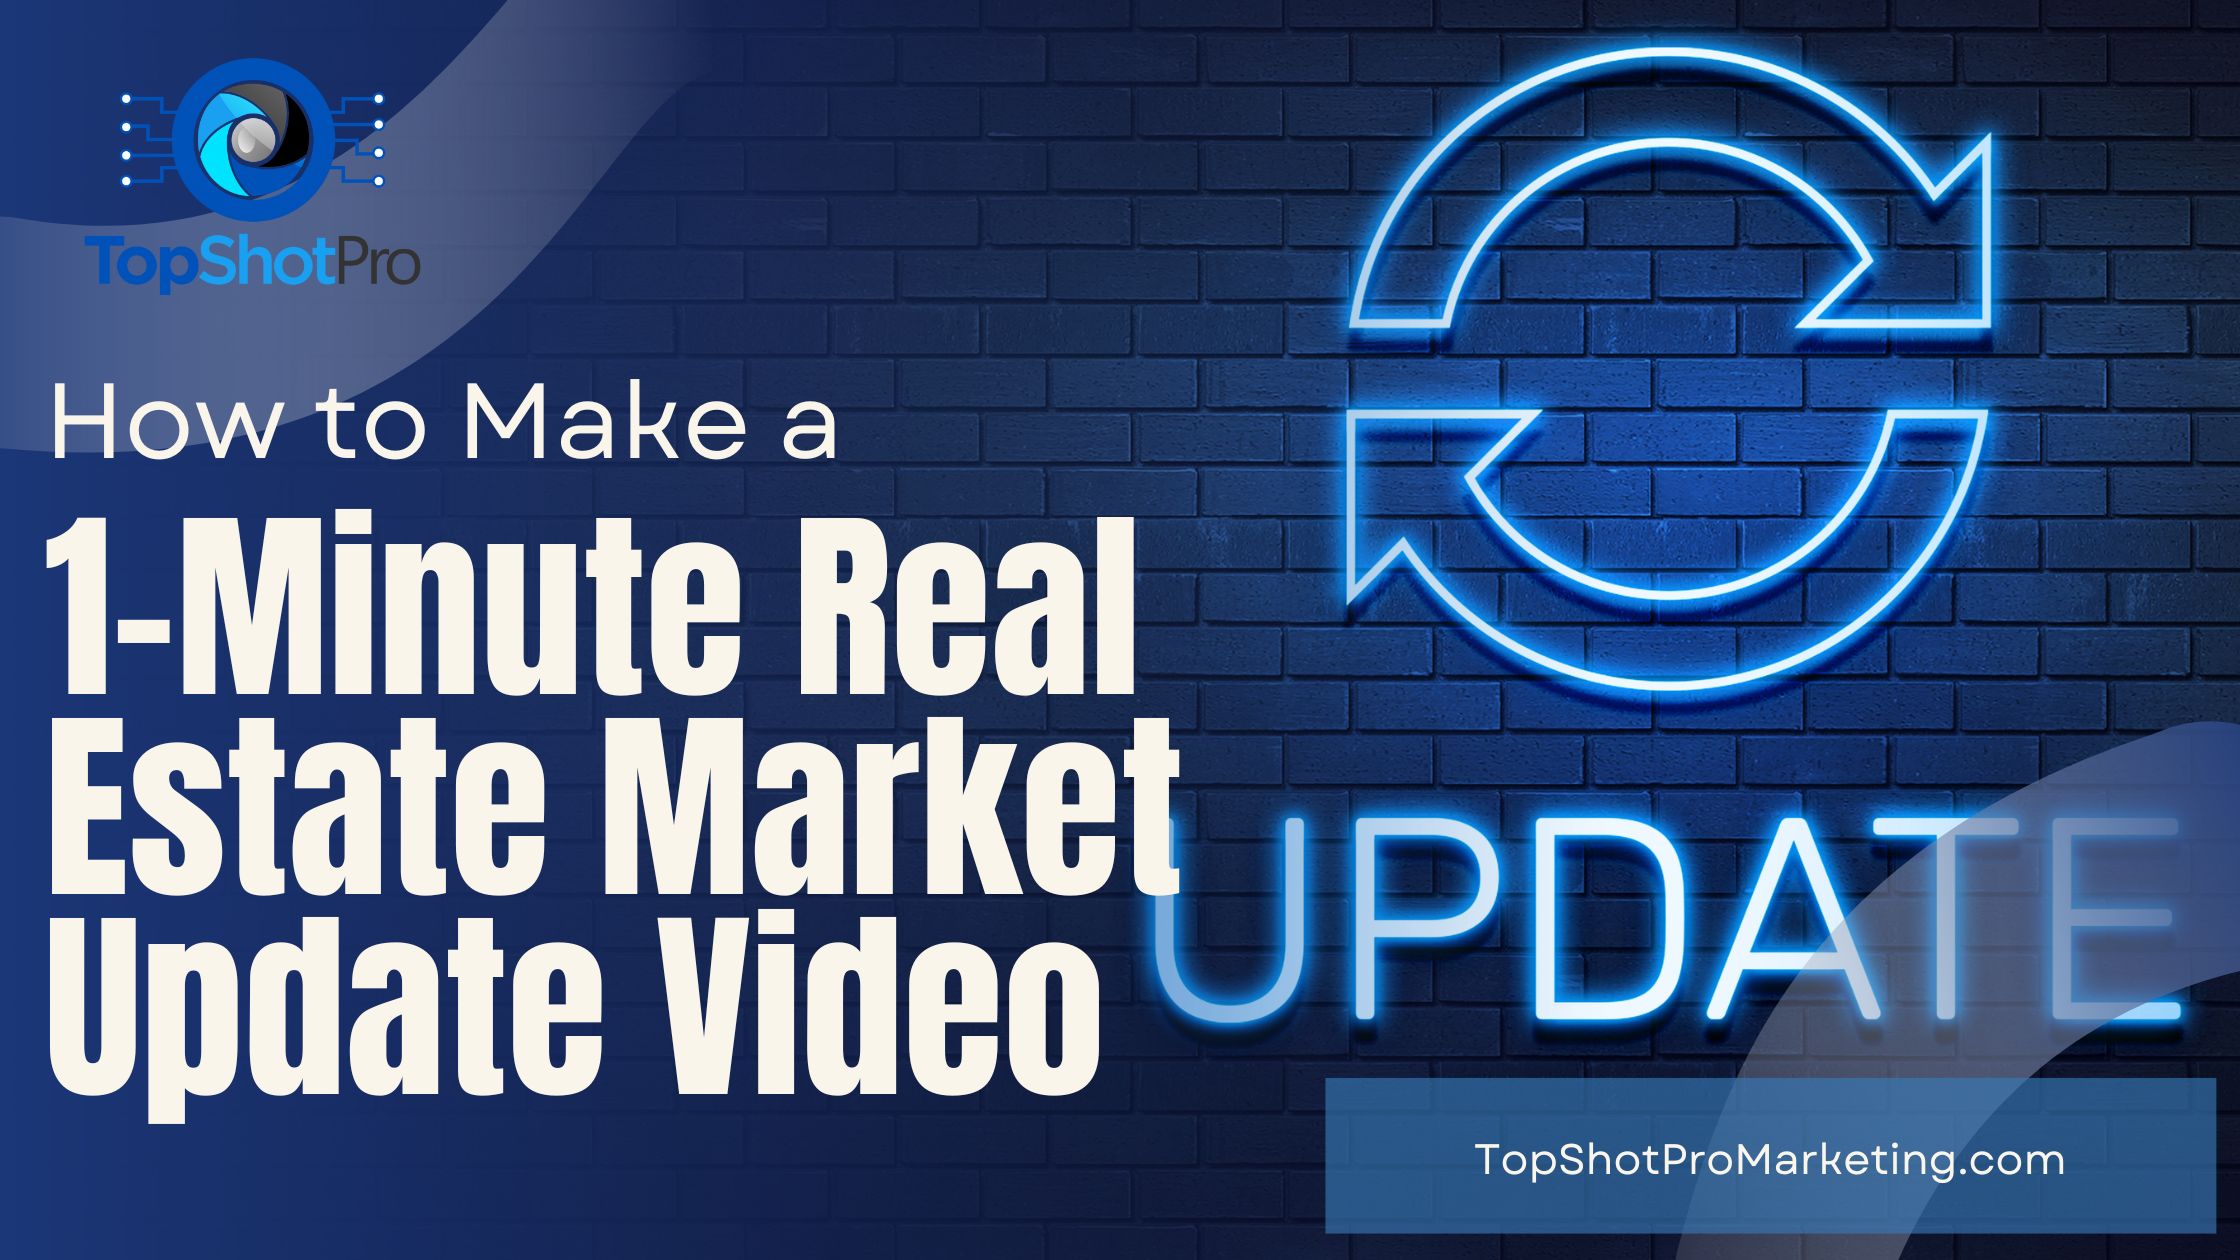 How to Make a 1-Minute Real Estate Market Update Video